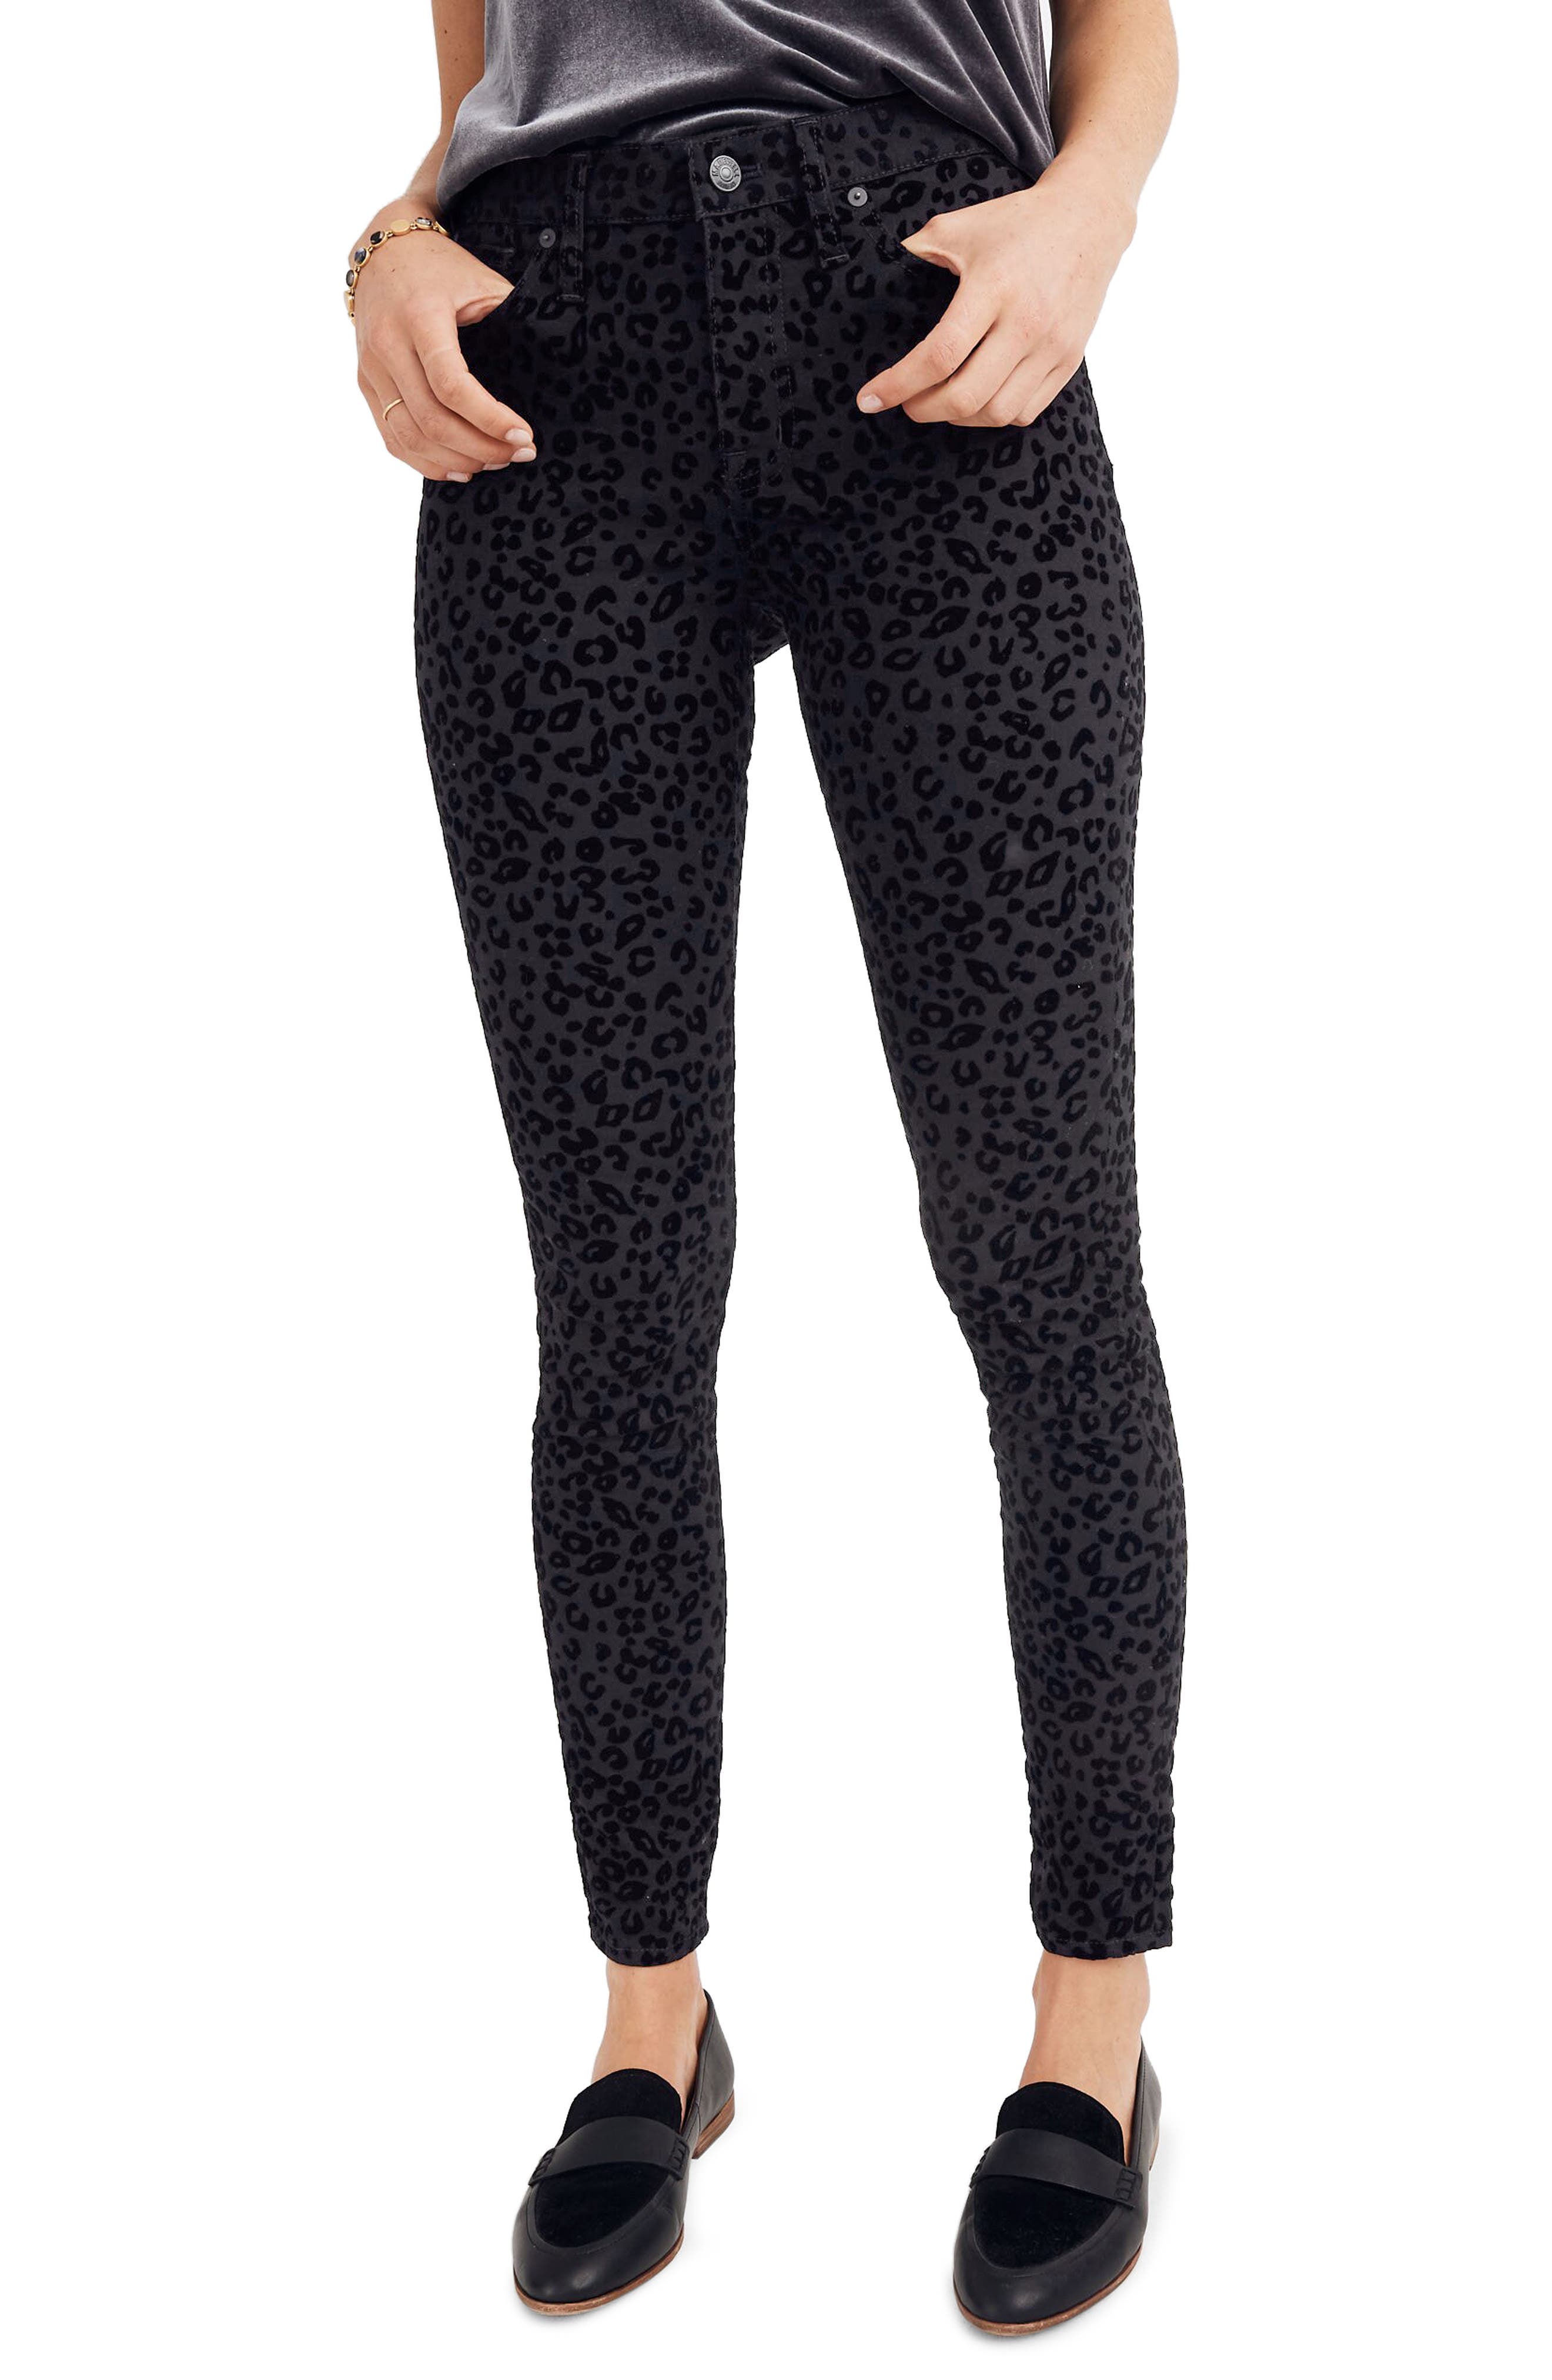 madewell leopard jeans